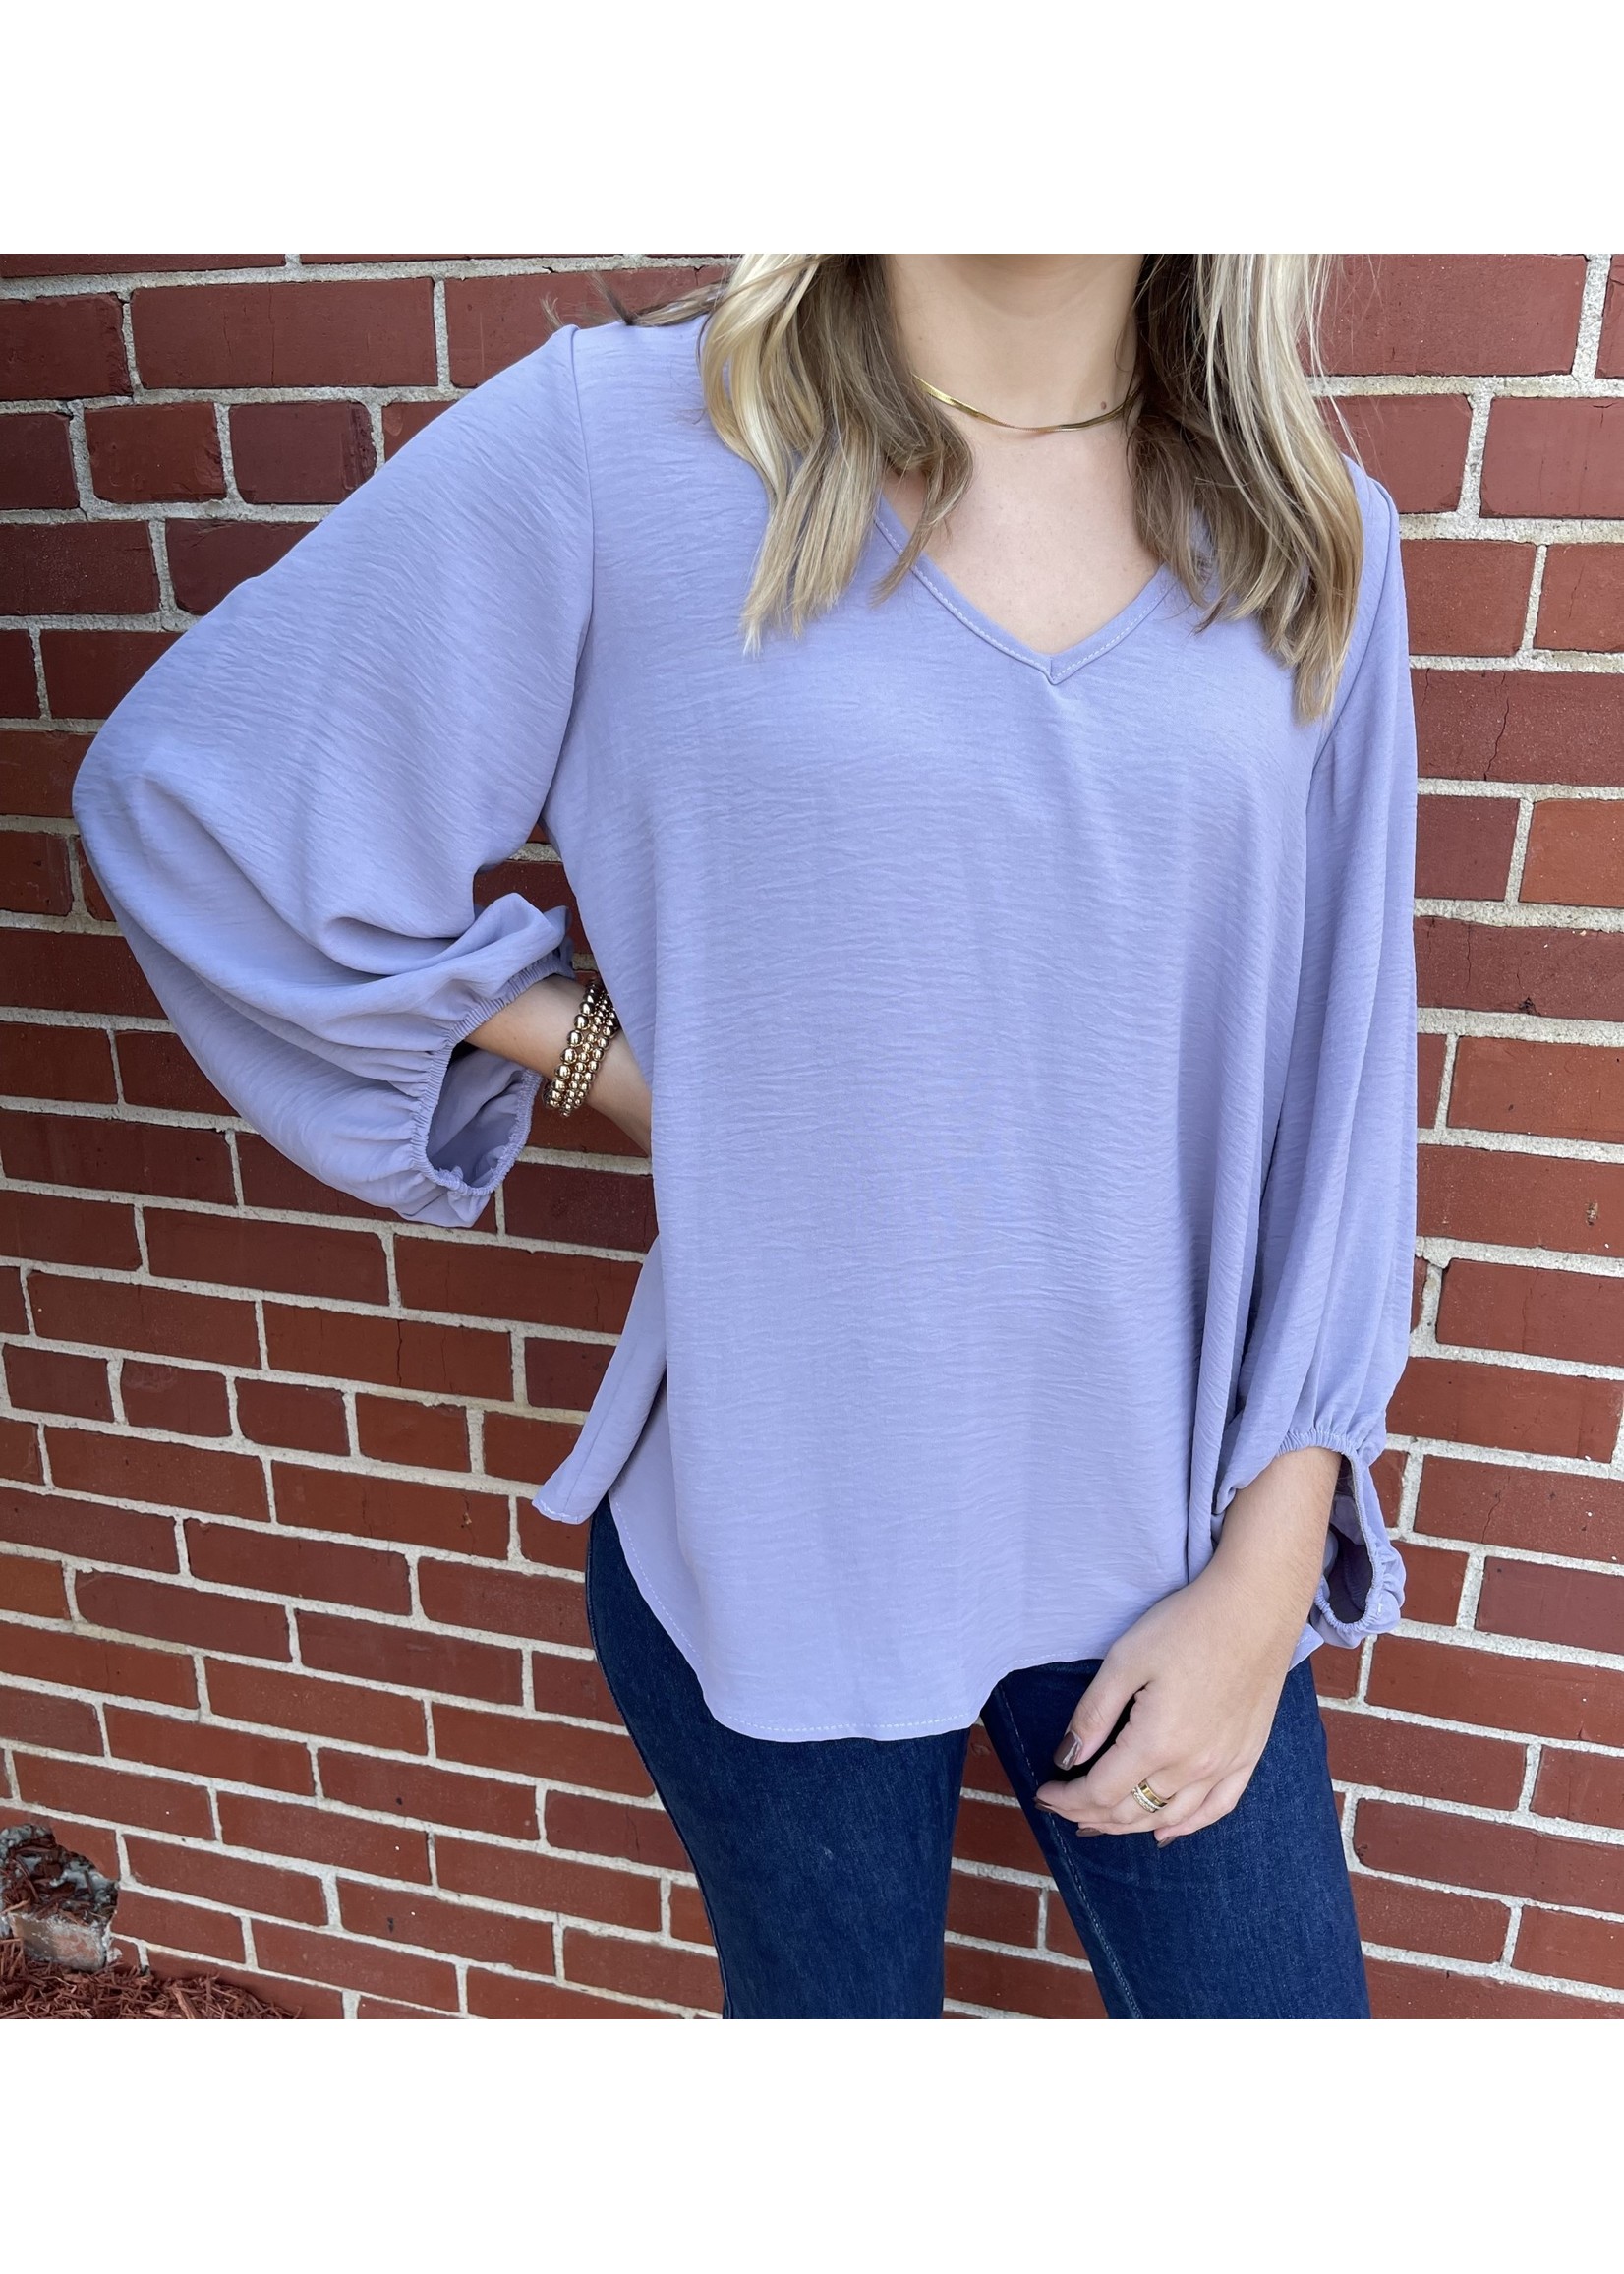 Jodifl V-Neck Top With Long Bubble Sleeves